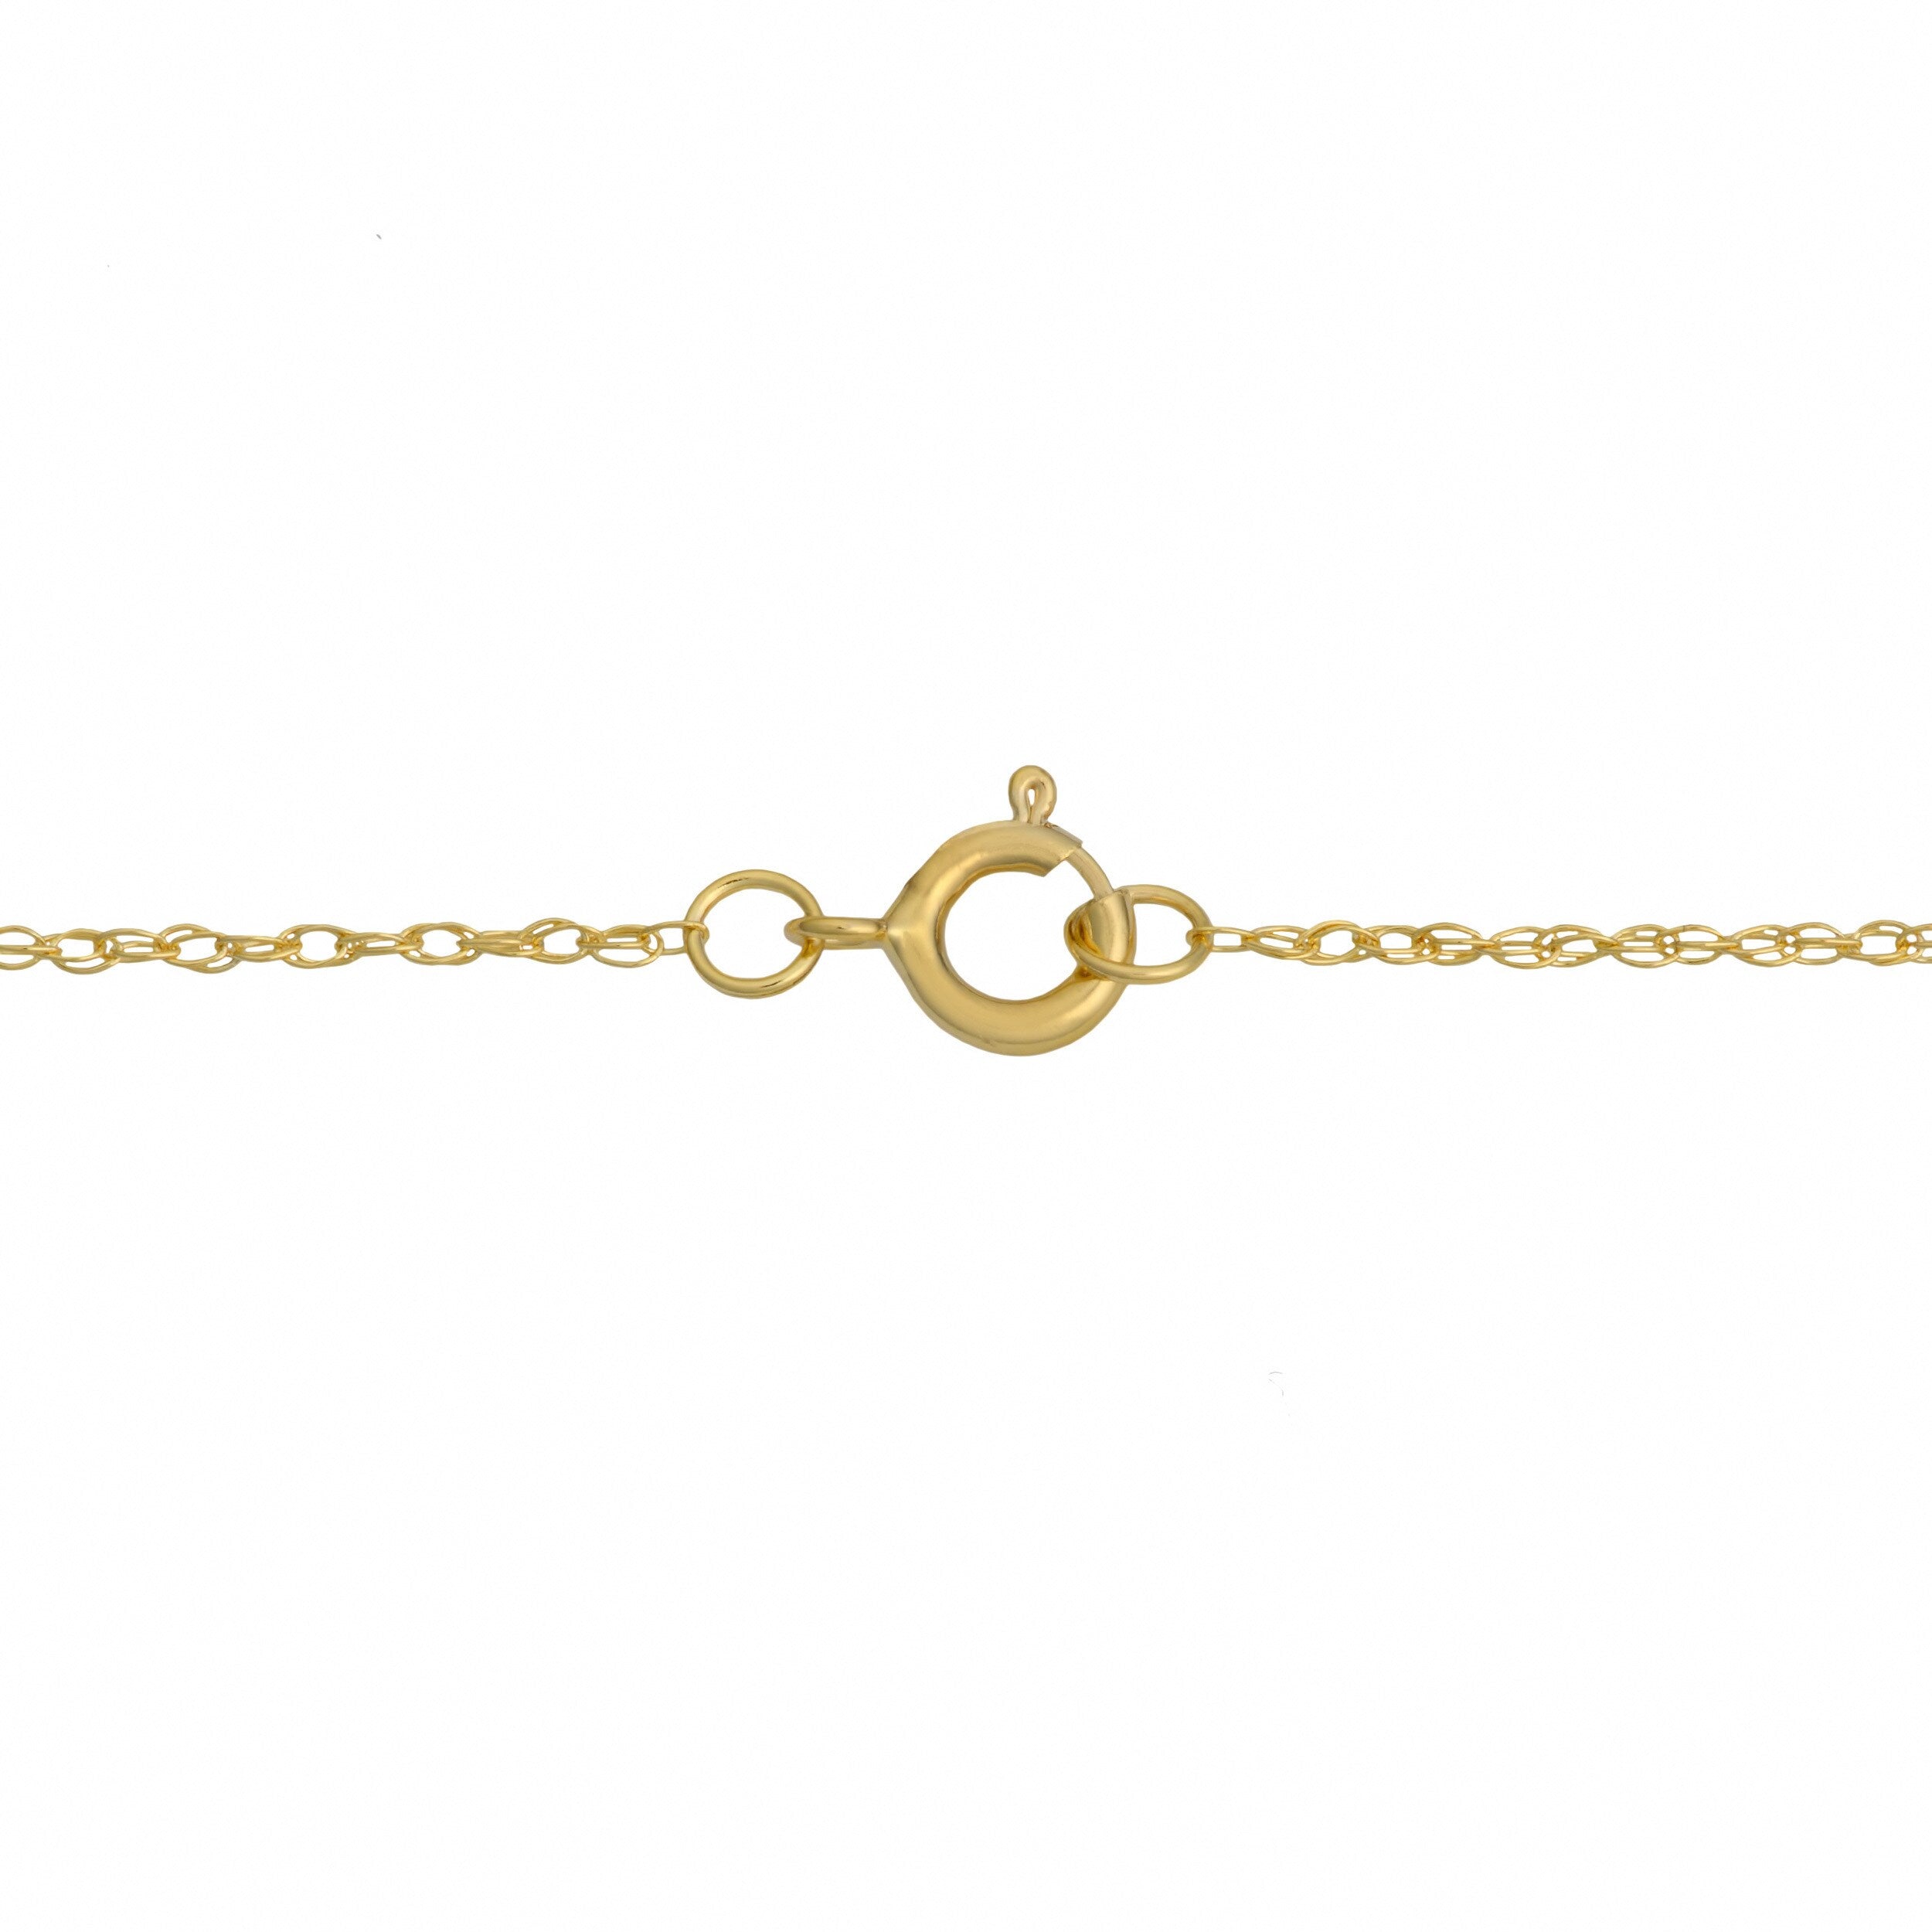 Fremada 10k Two-tone Gold Double Heart Pendant with Delicate Rope Chain Necklace